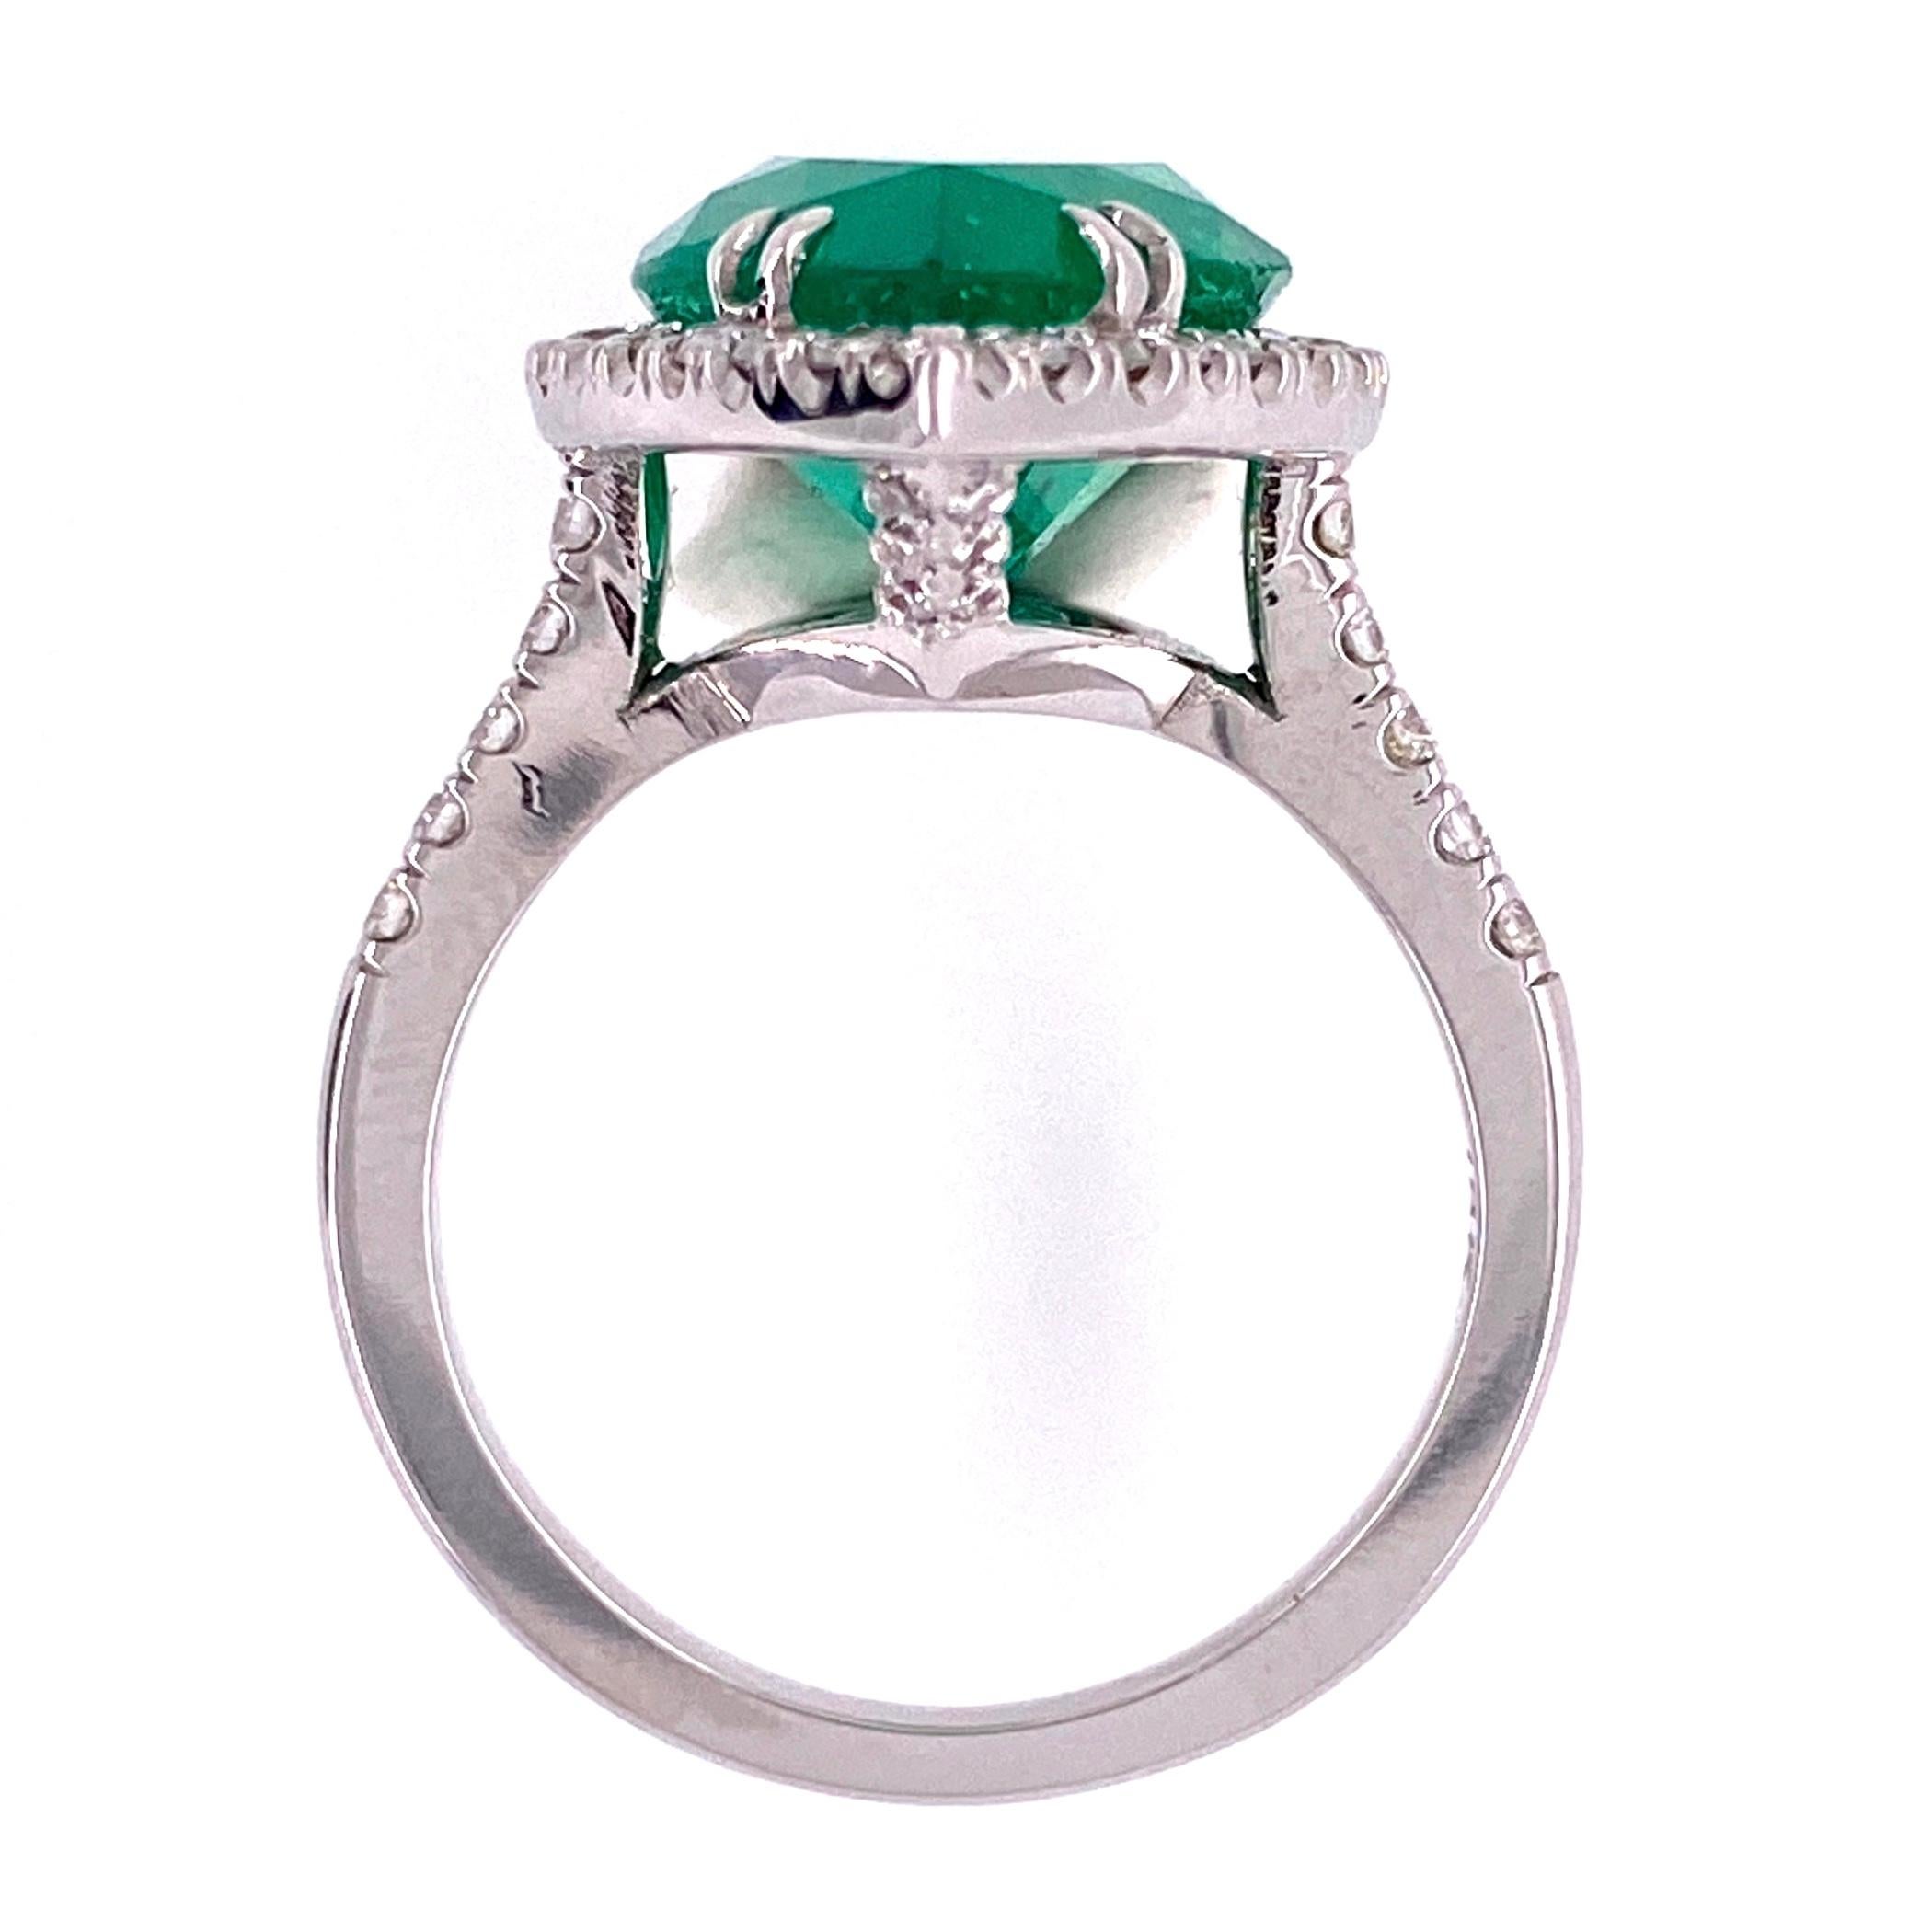 Pear Cut 6.96 Carat Pear Shaped Emerald and Diamond Ring Estate Fine Jewelry For Sale